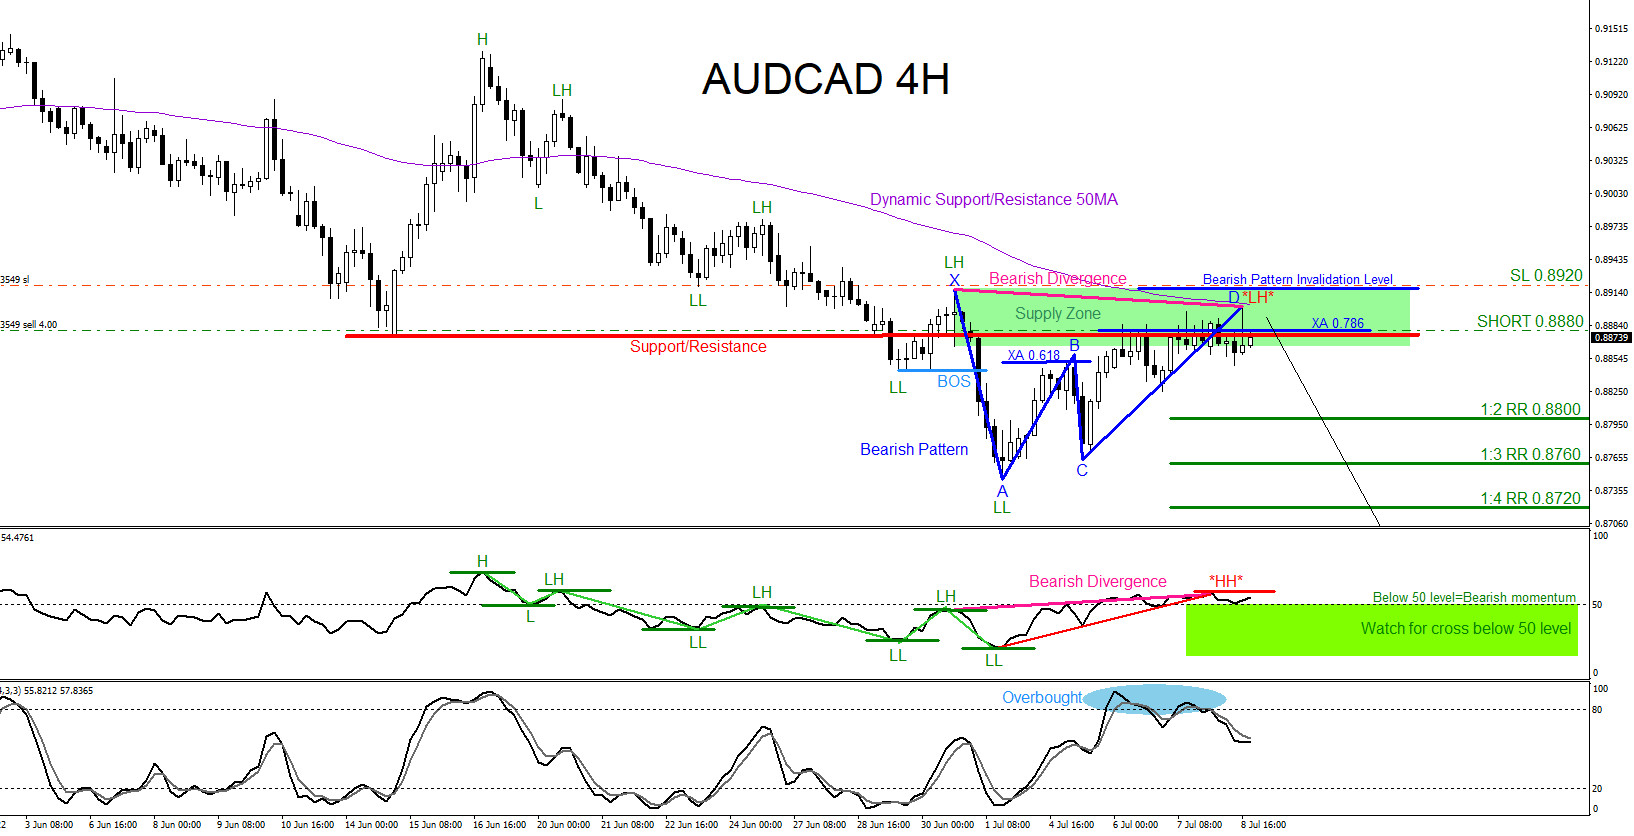 AUDCAD : Catching the Sell Setup for a Move Lower